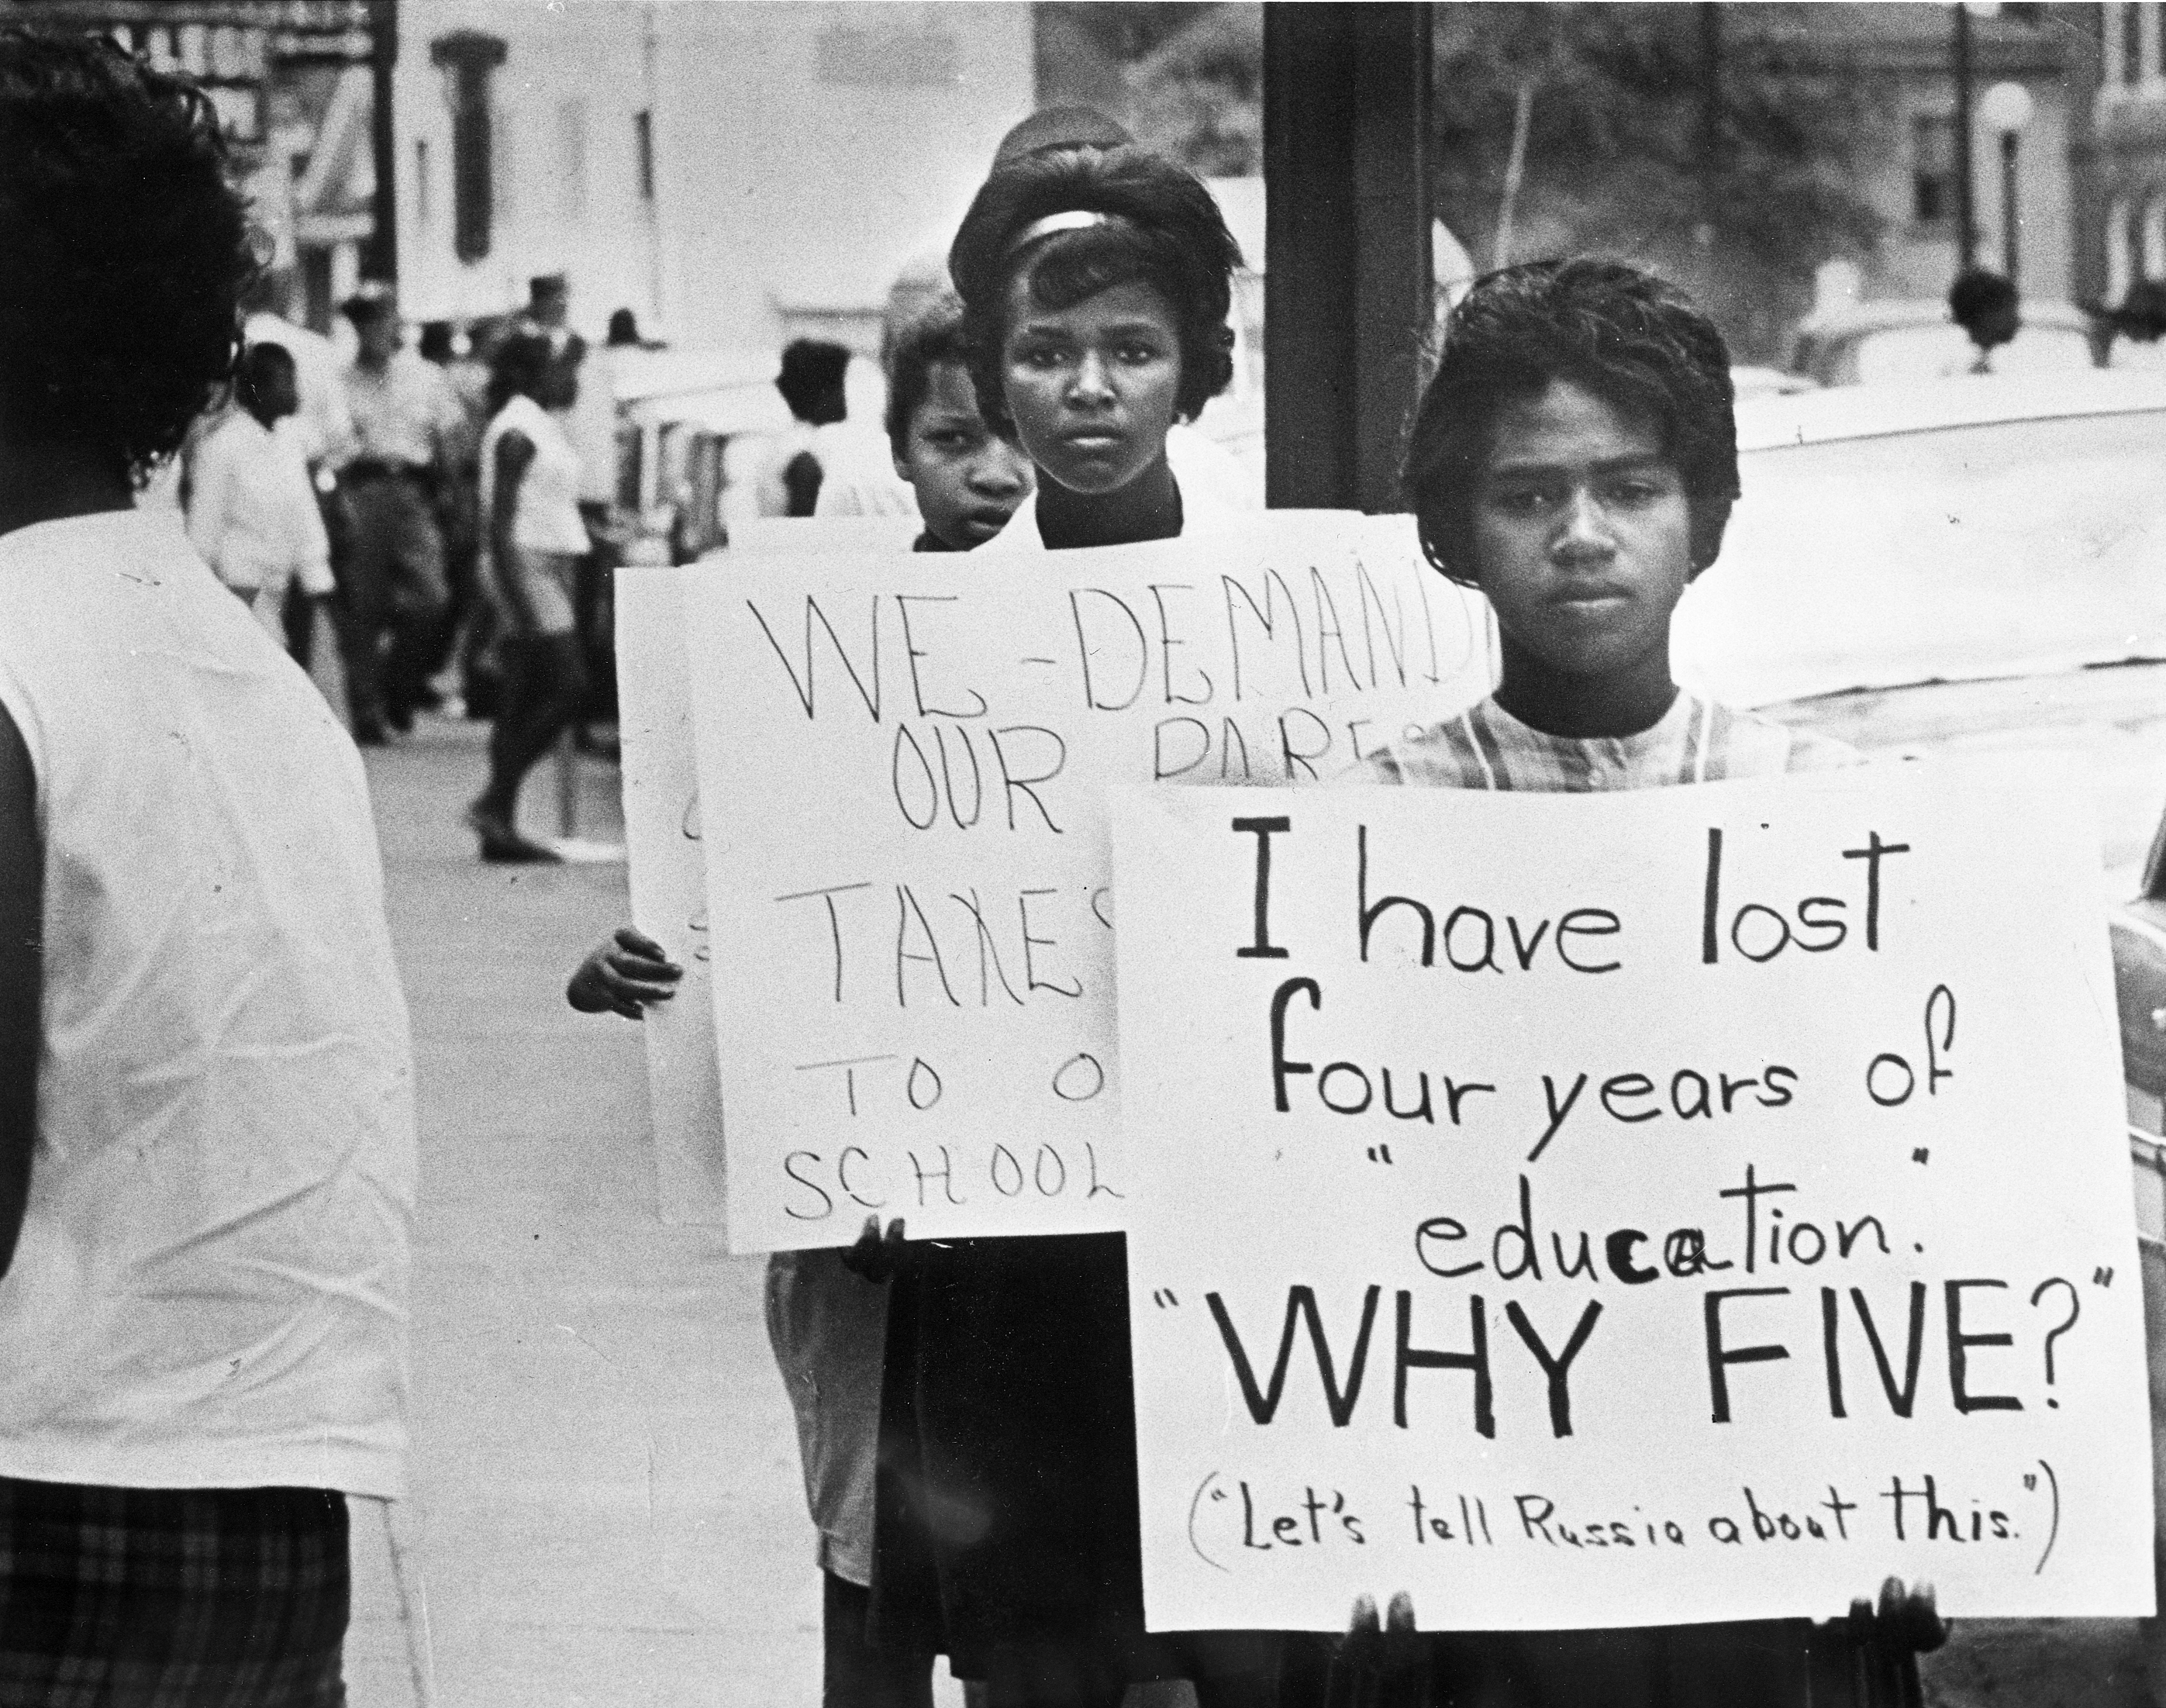 An image of several female African American teenagers holding picket signs